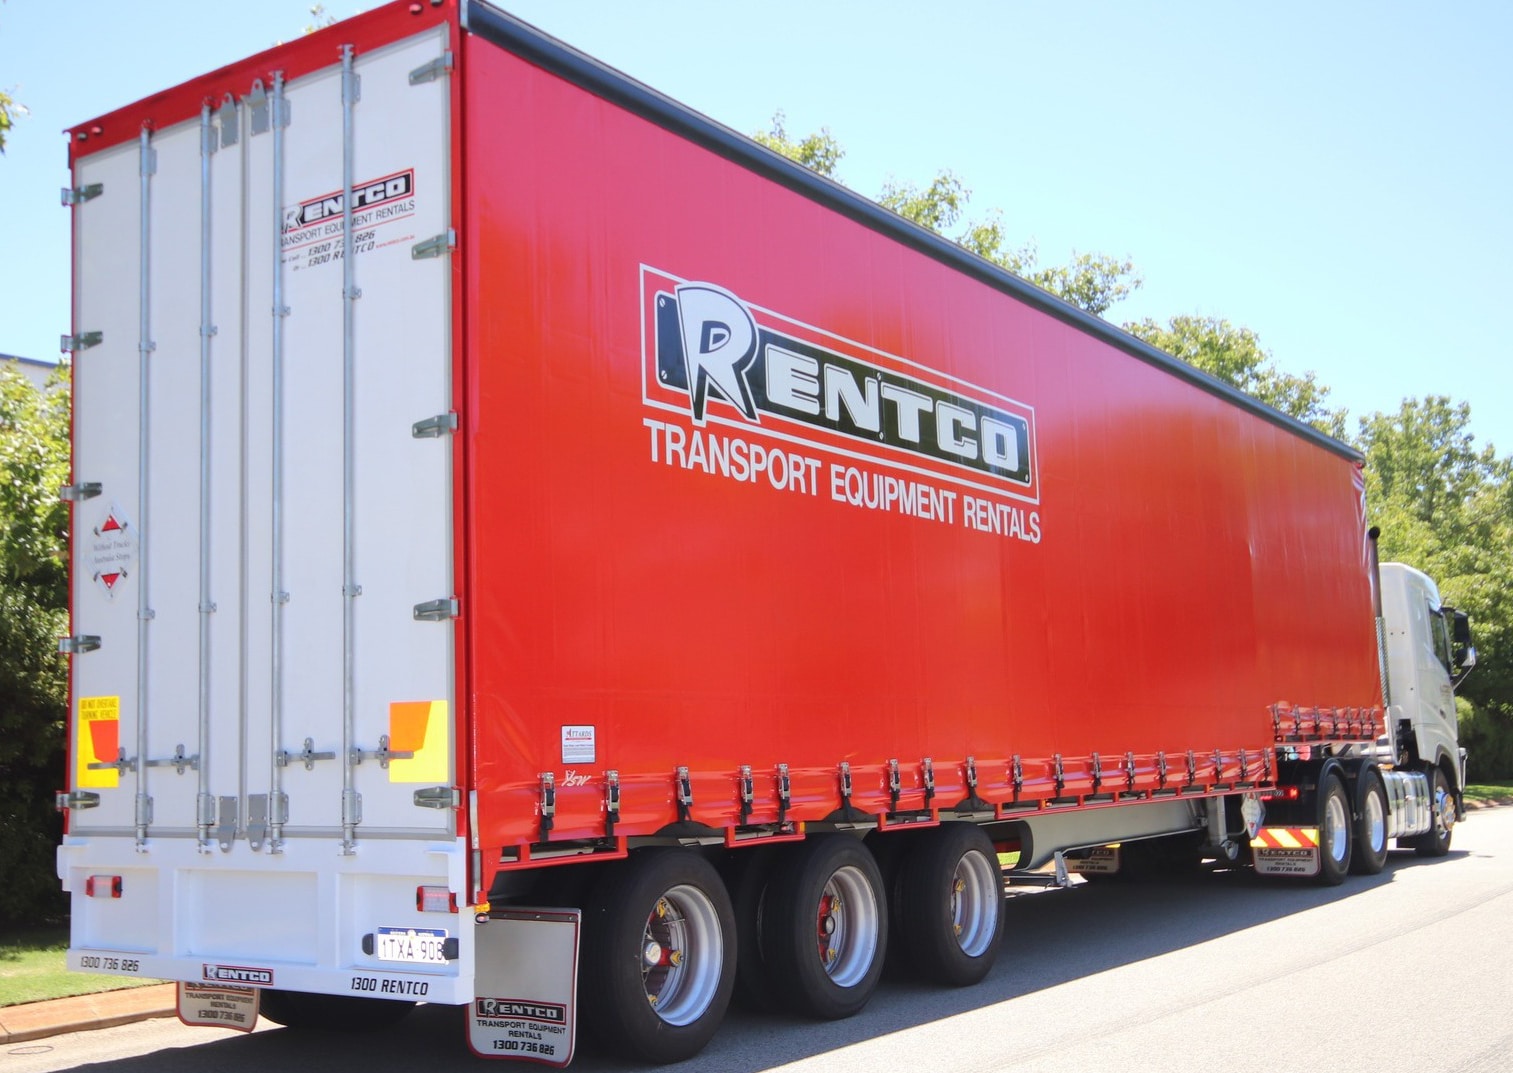 A tautliner truck with 'Rentco Transport Equipment Rentals' written on the side